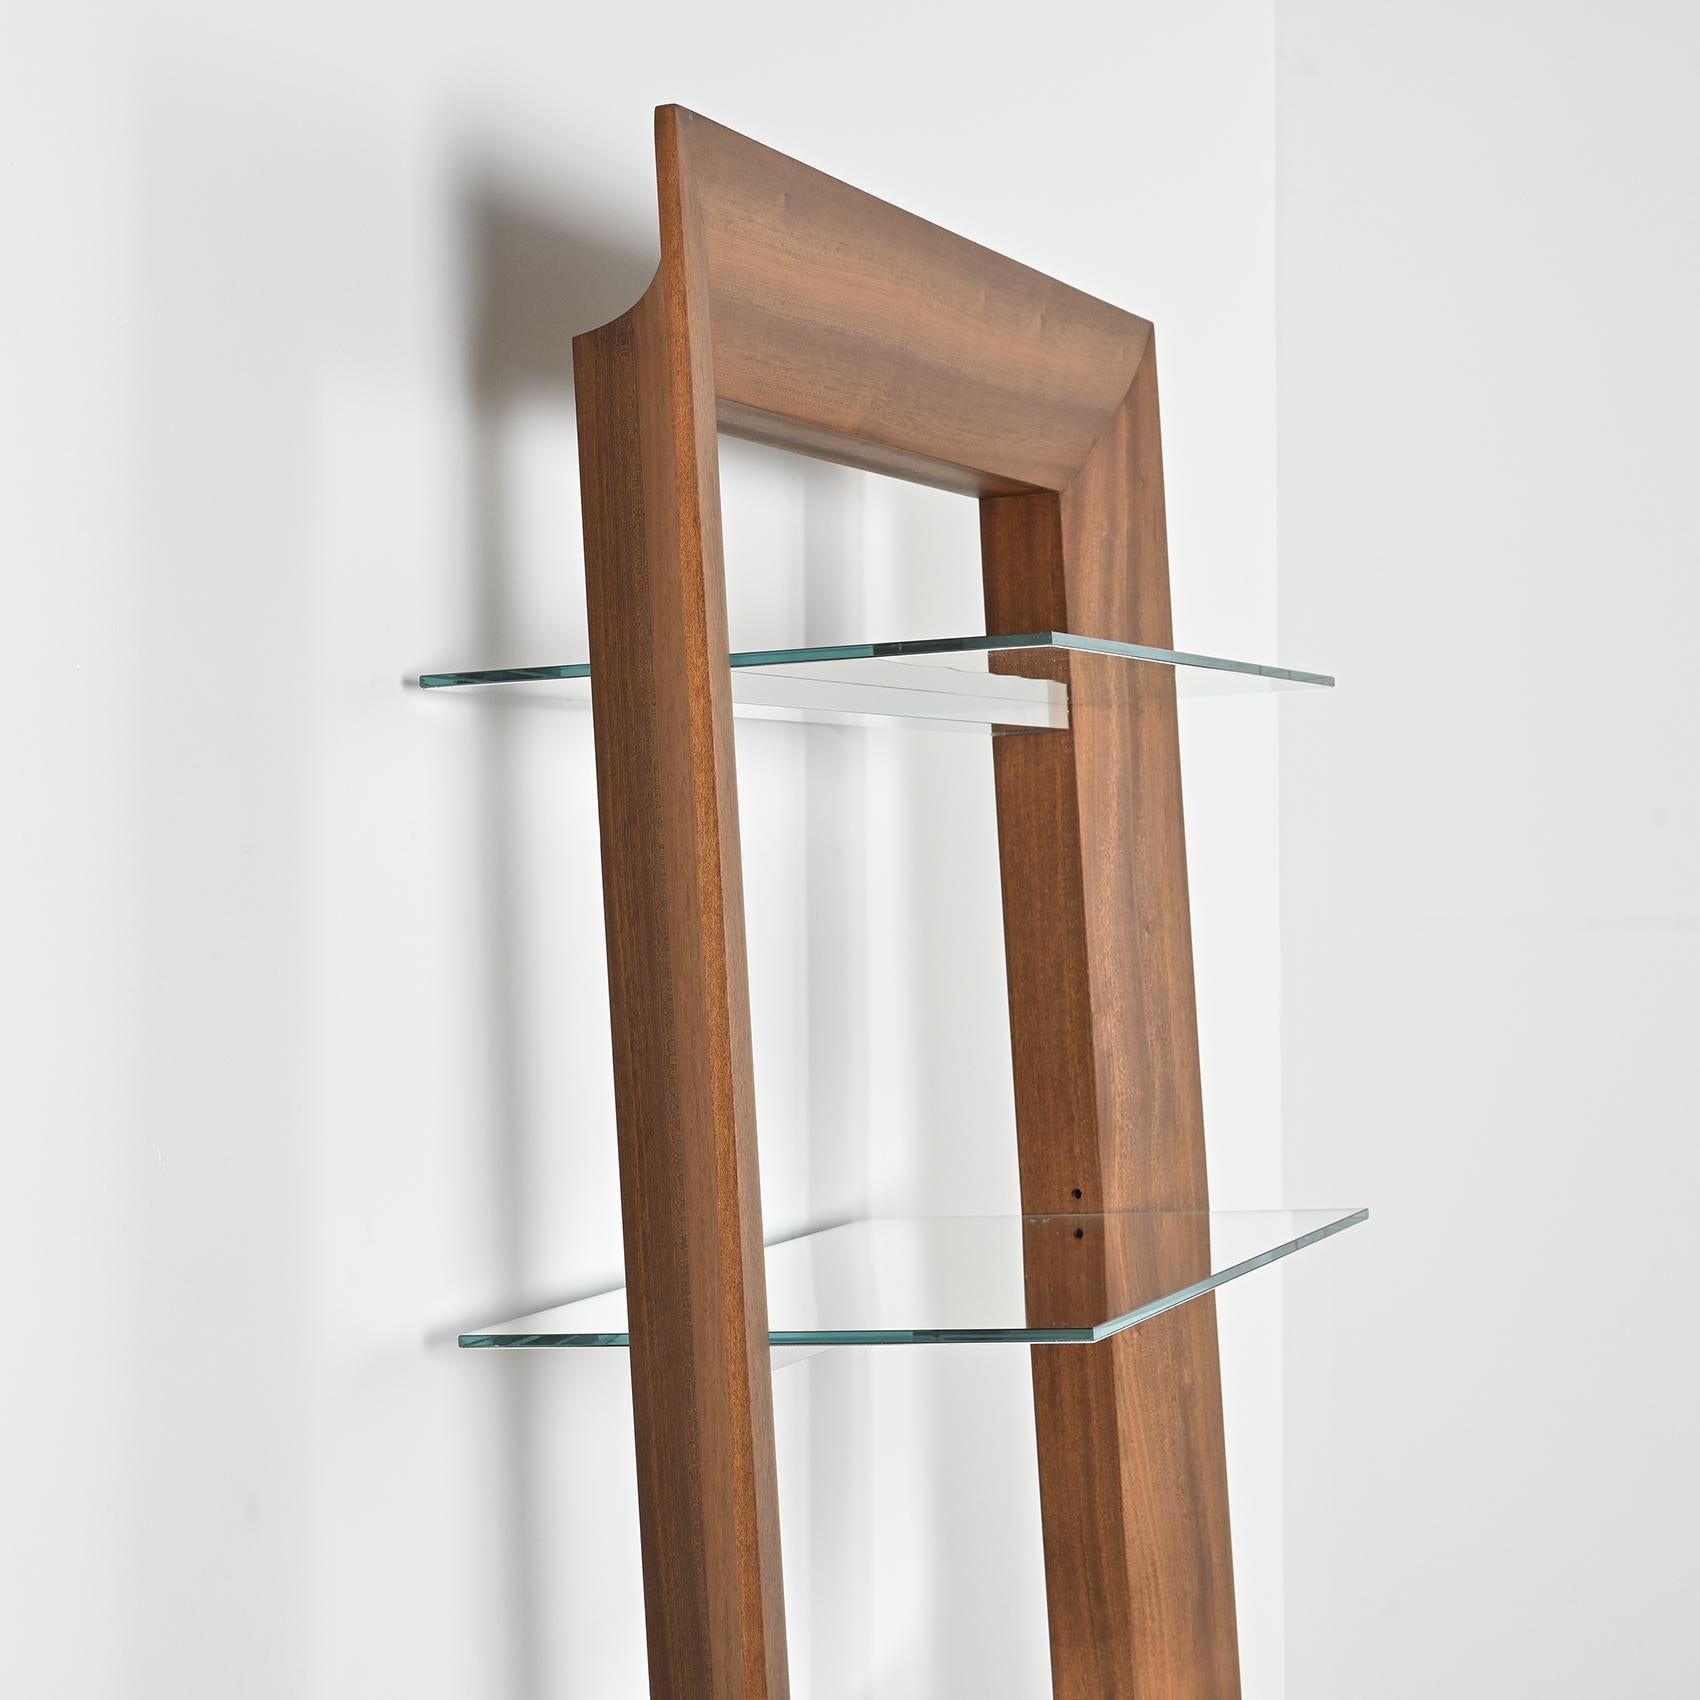 A Pair of Modular Mirror-Bookshelves by Philippe Starck, Driade 2007 In Good Condition For Sale In VILLEURBANNE, FR